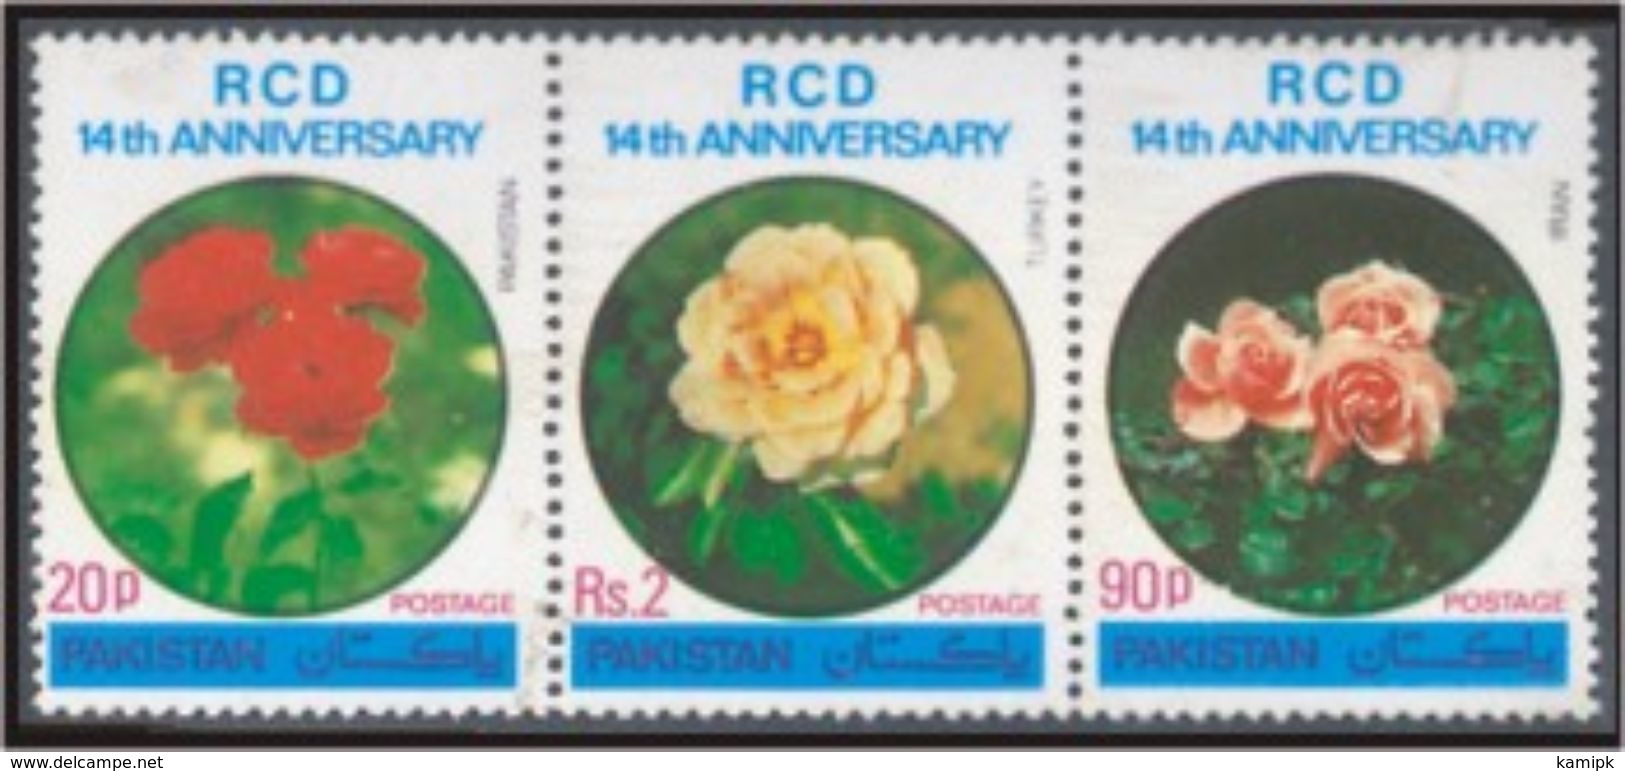 PAKISTAN MNH** STAMPS , 1978 The 14th Anniversary Of Regional Co-operation For Development Or RCD - Pakistan